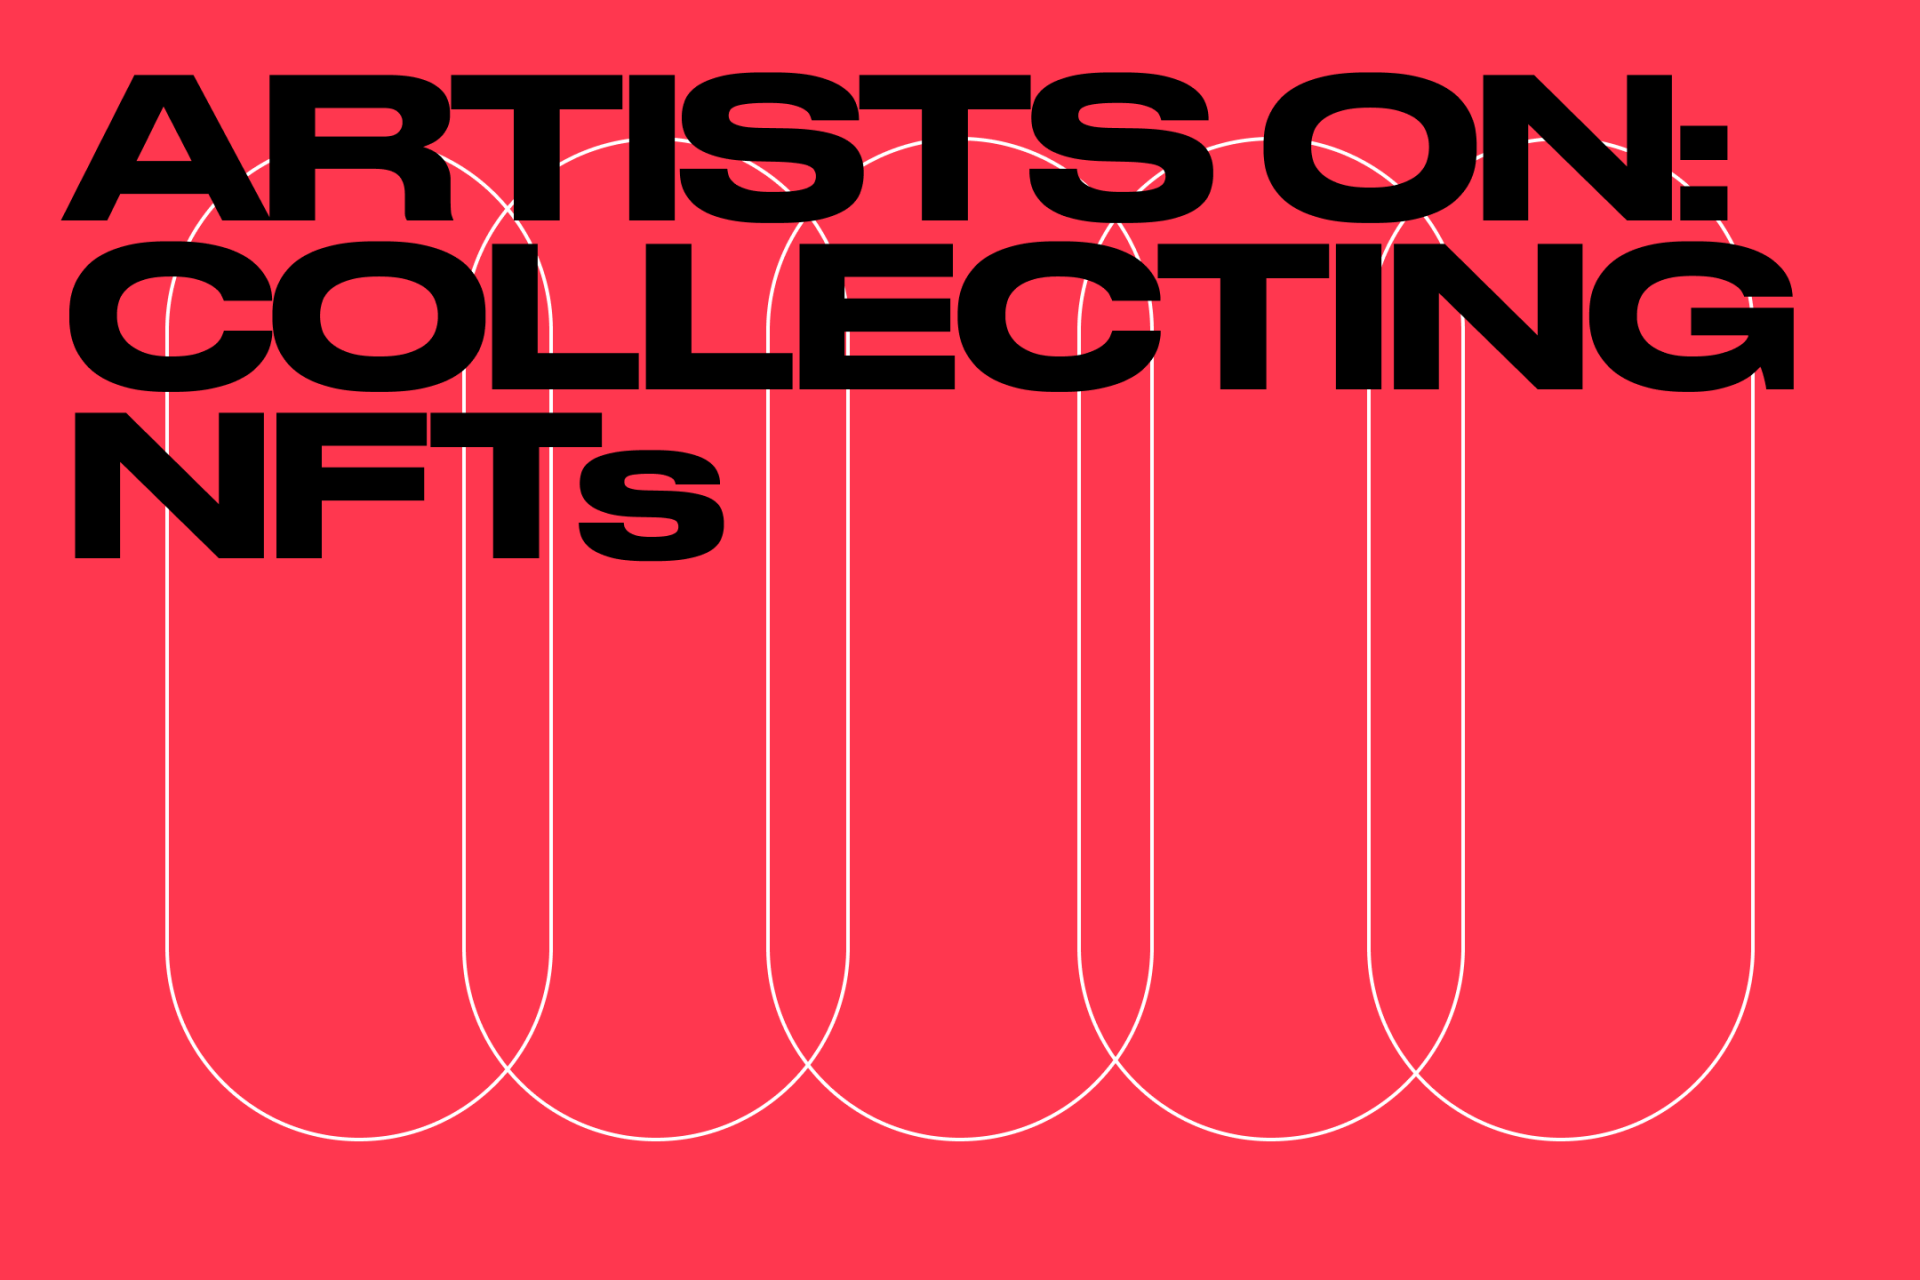 Why artists are collecting each other’s NFTs.